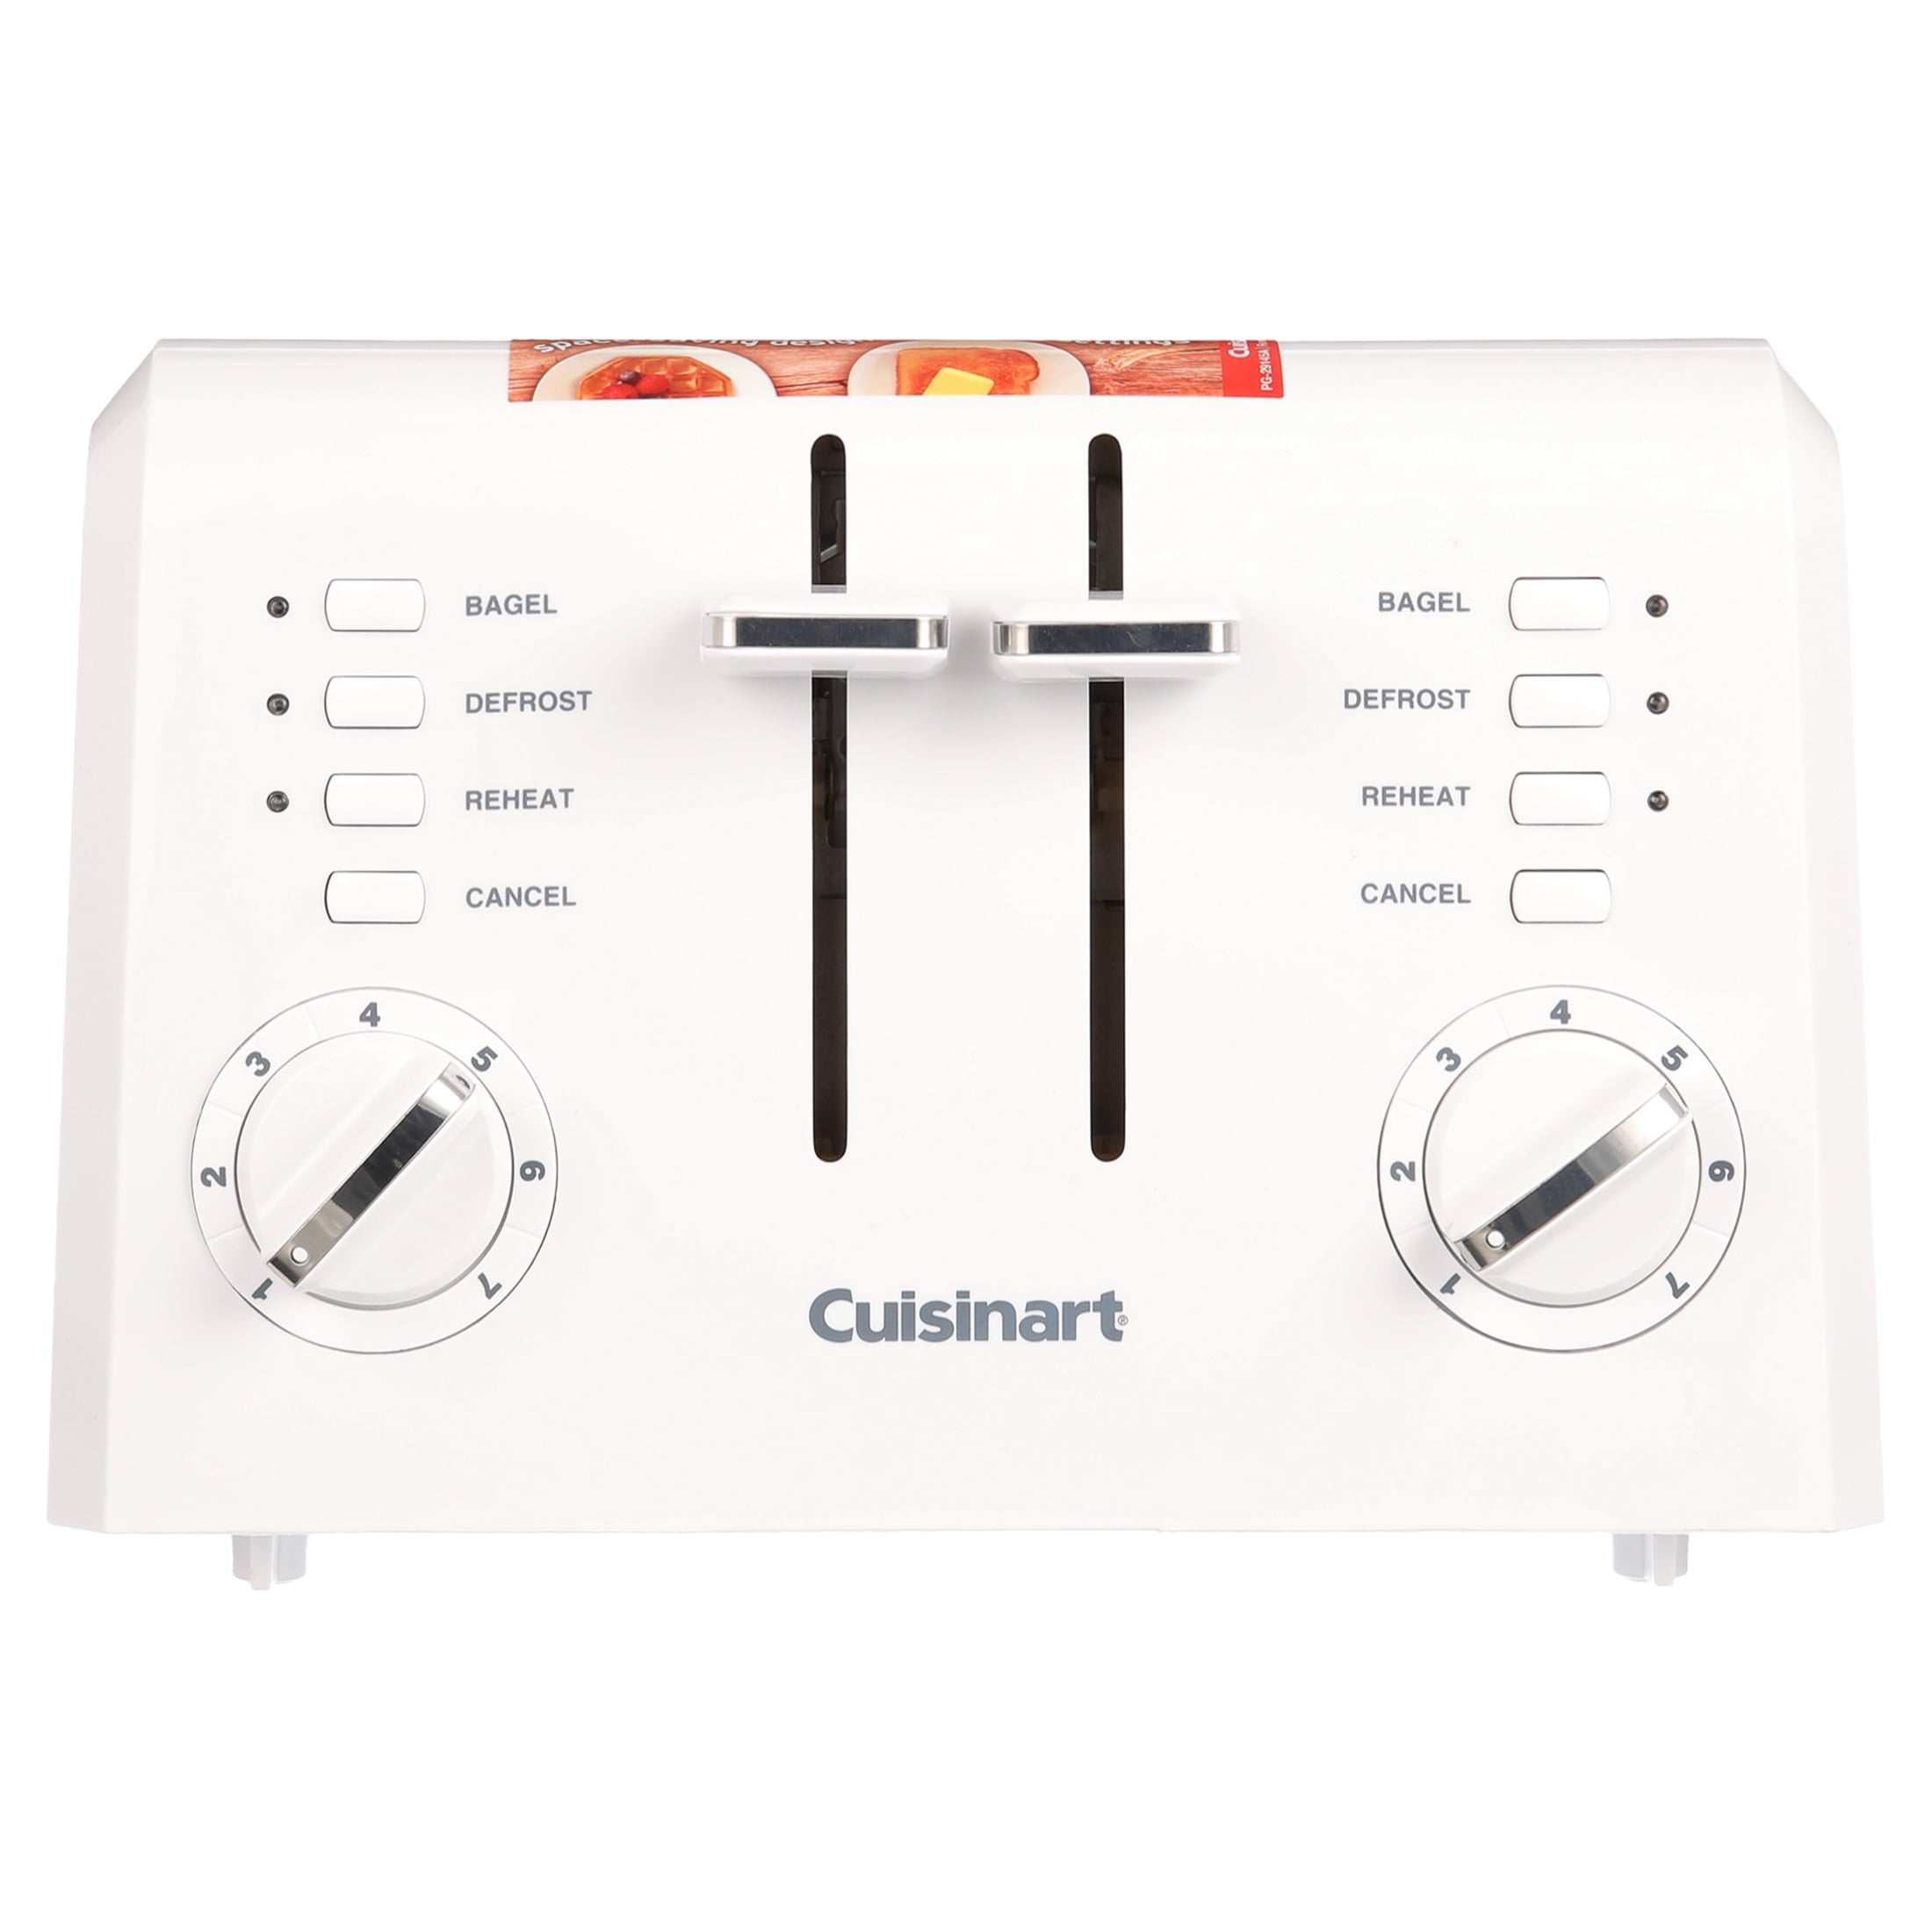  Cuisinart Mini Prep Plus Food Processor, 4 Cup, Brushed  Stainless & 2-Slice Toaster Oven, Compact, White, CPT-122: Home & Kitchen